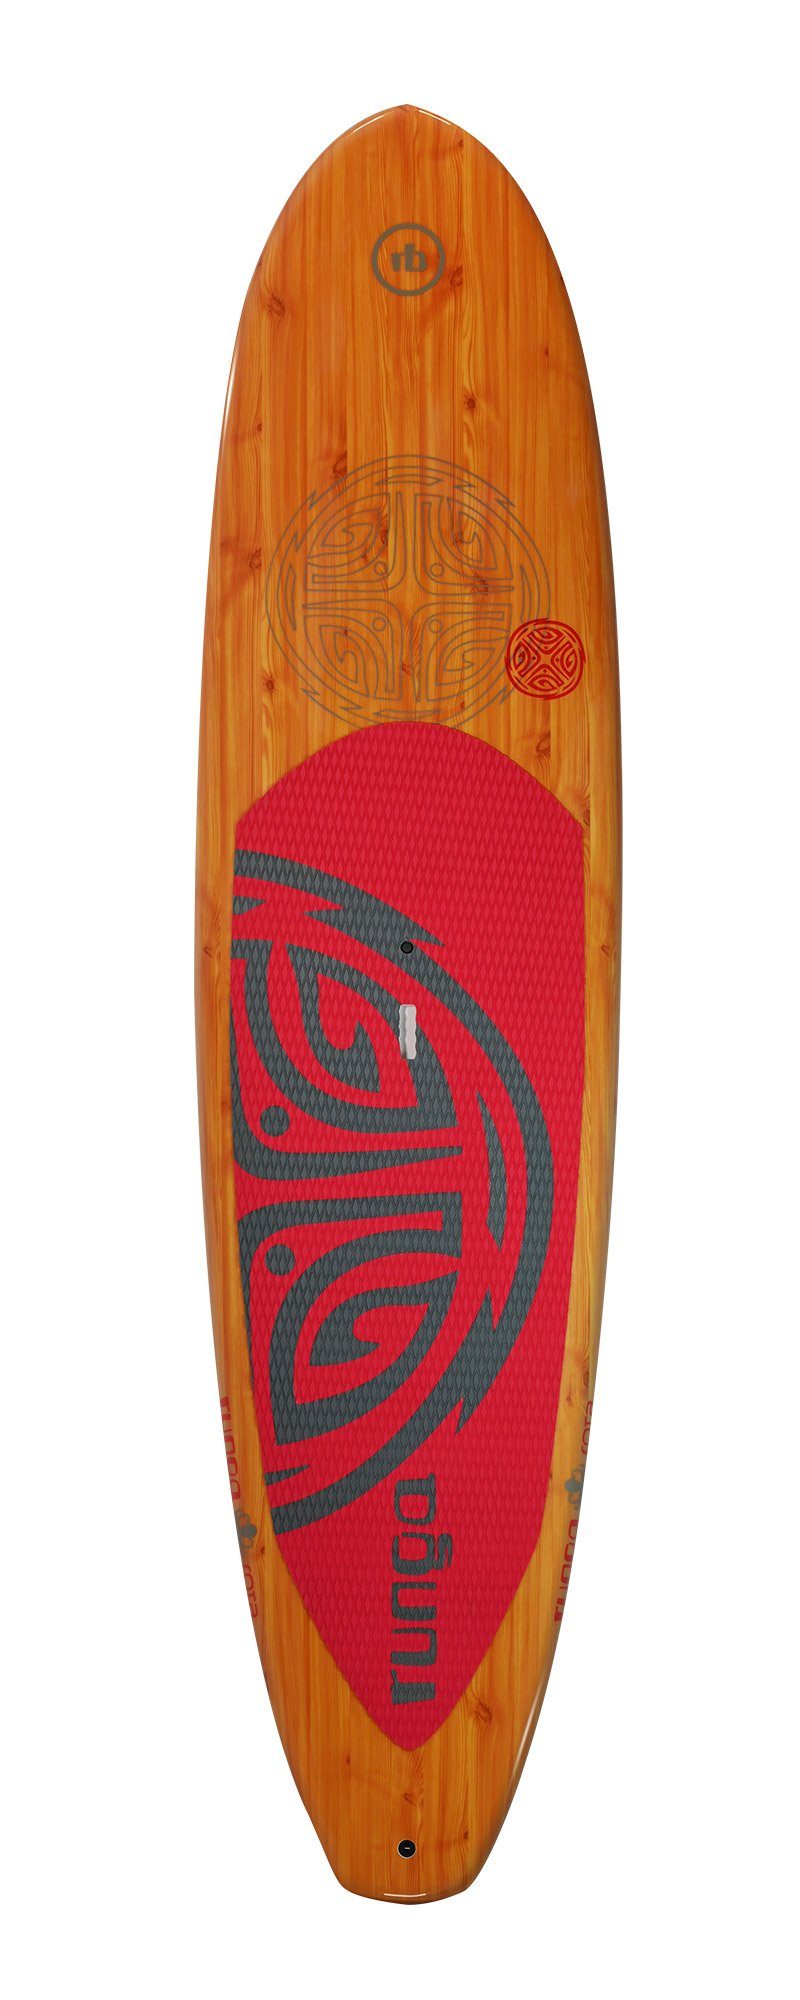 Hard Allrounder, & 3-tlg. coiled SUP-Board ROTA Up SUP, RED Finnen-Set) leash Paddling Inkl. Stand (9.6, Runga-Boards Board